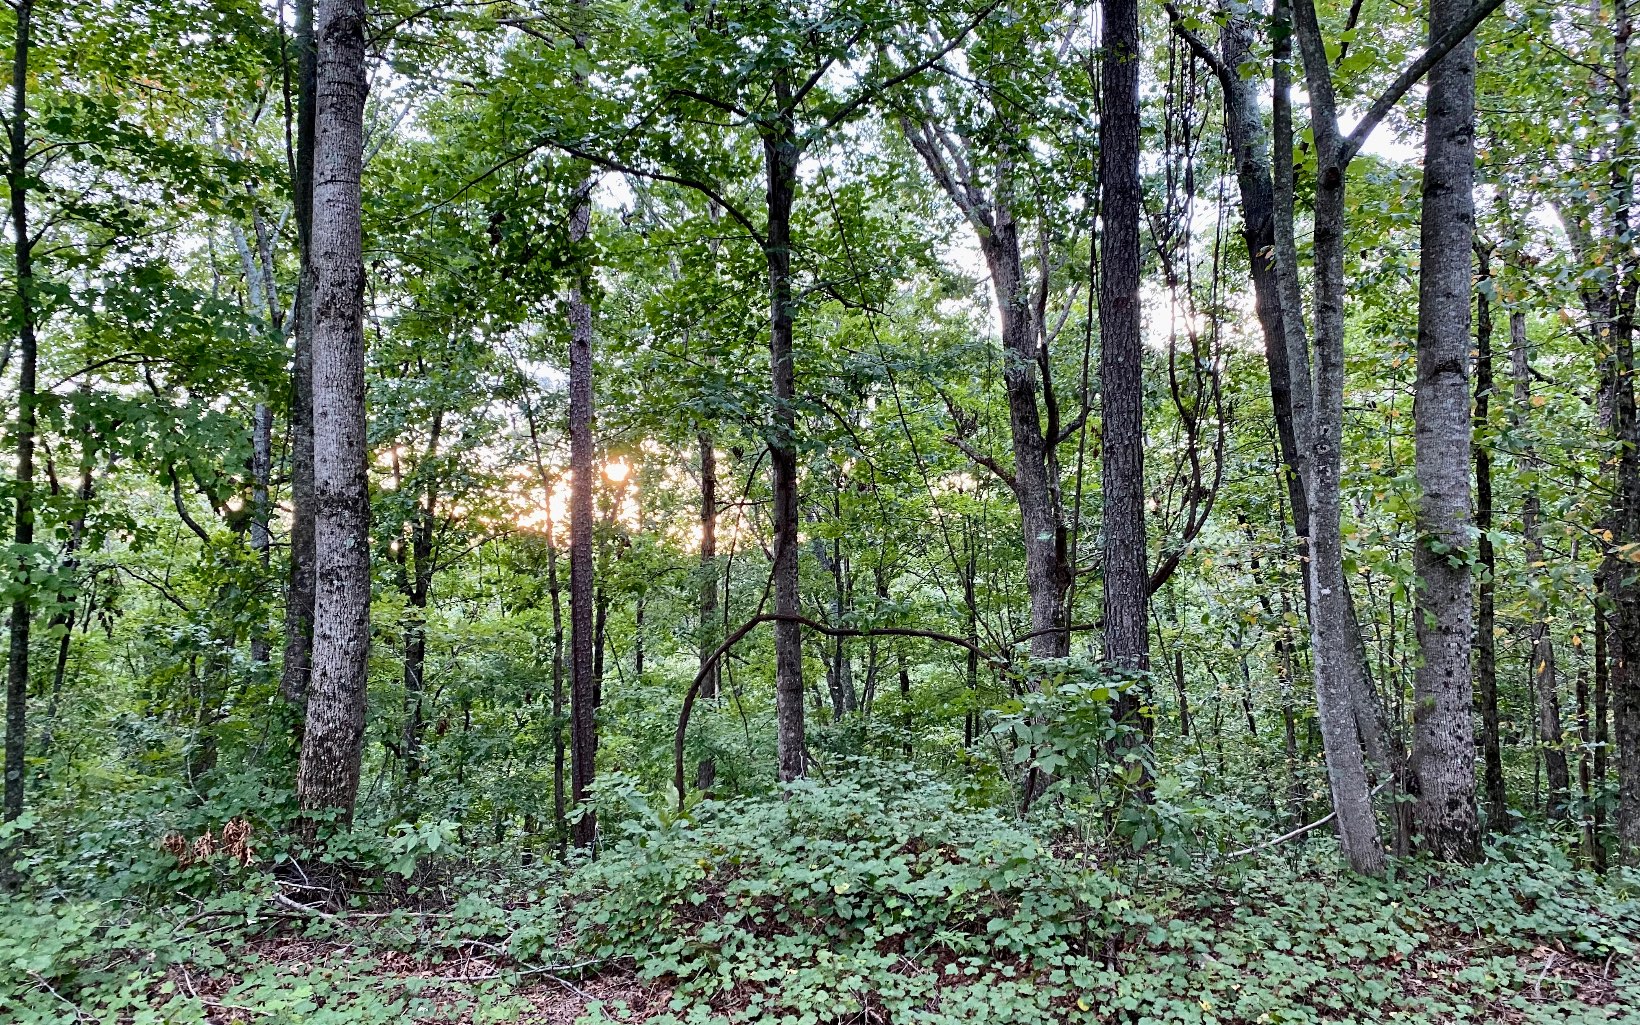 BEAUTIFUL 9.888 ACRES - Located in the North Georgia Mountains Only Minutes From Carters Lake Dam and Beach Area. This Very Private Acreage offers Power to the property line, Mountain Views and Beautiful Hardwoods. Beautiful Building Knoll level with the road. Easy Access to Hwy. 515 and Hwy. 411.